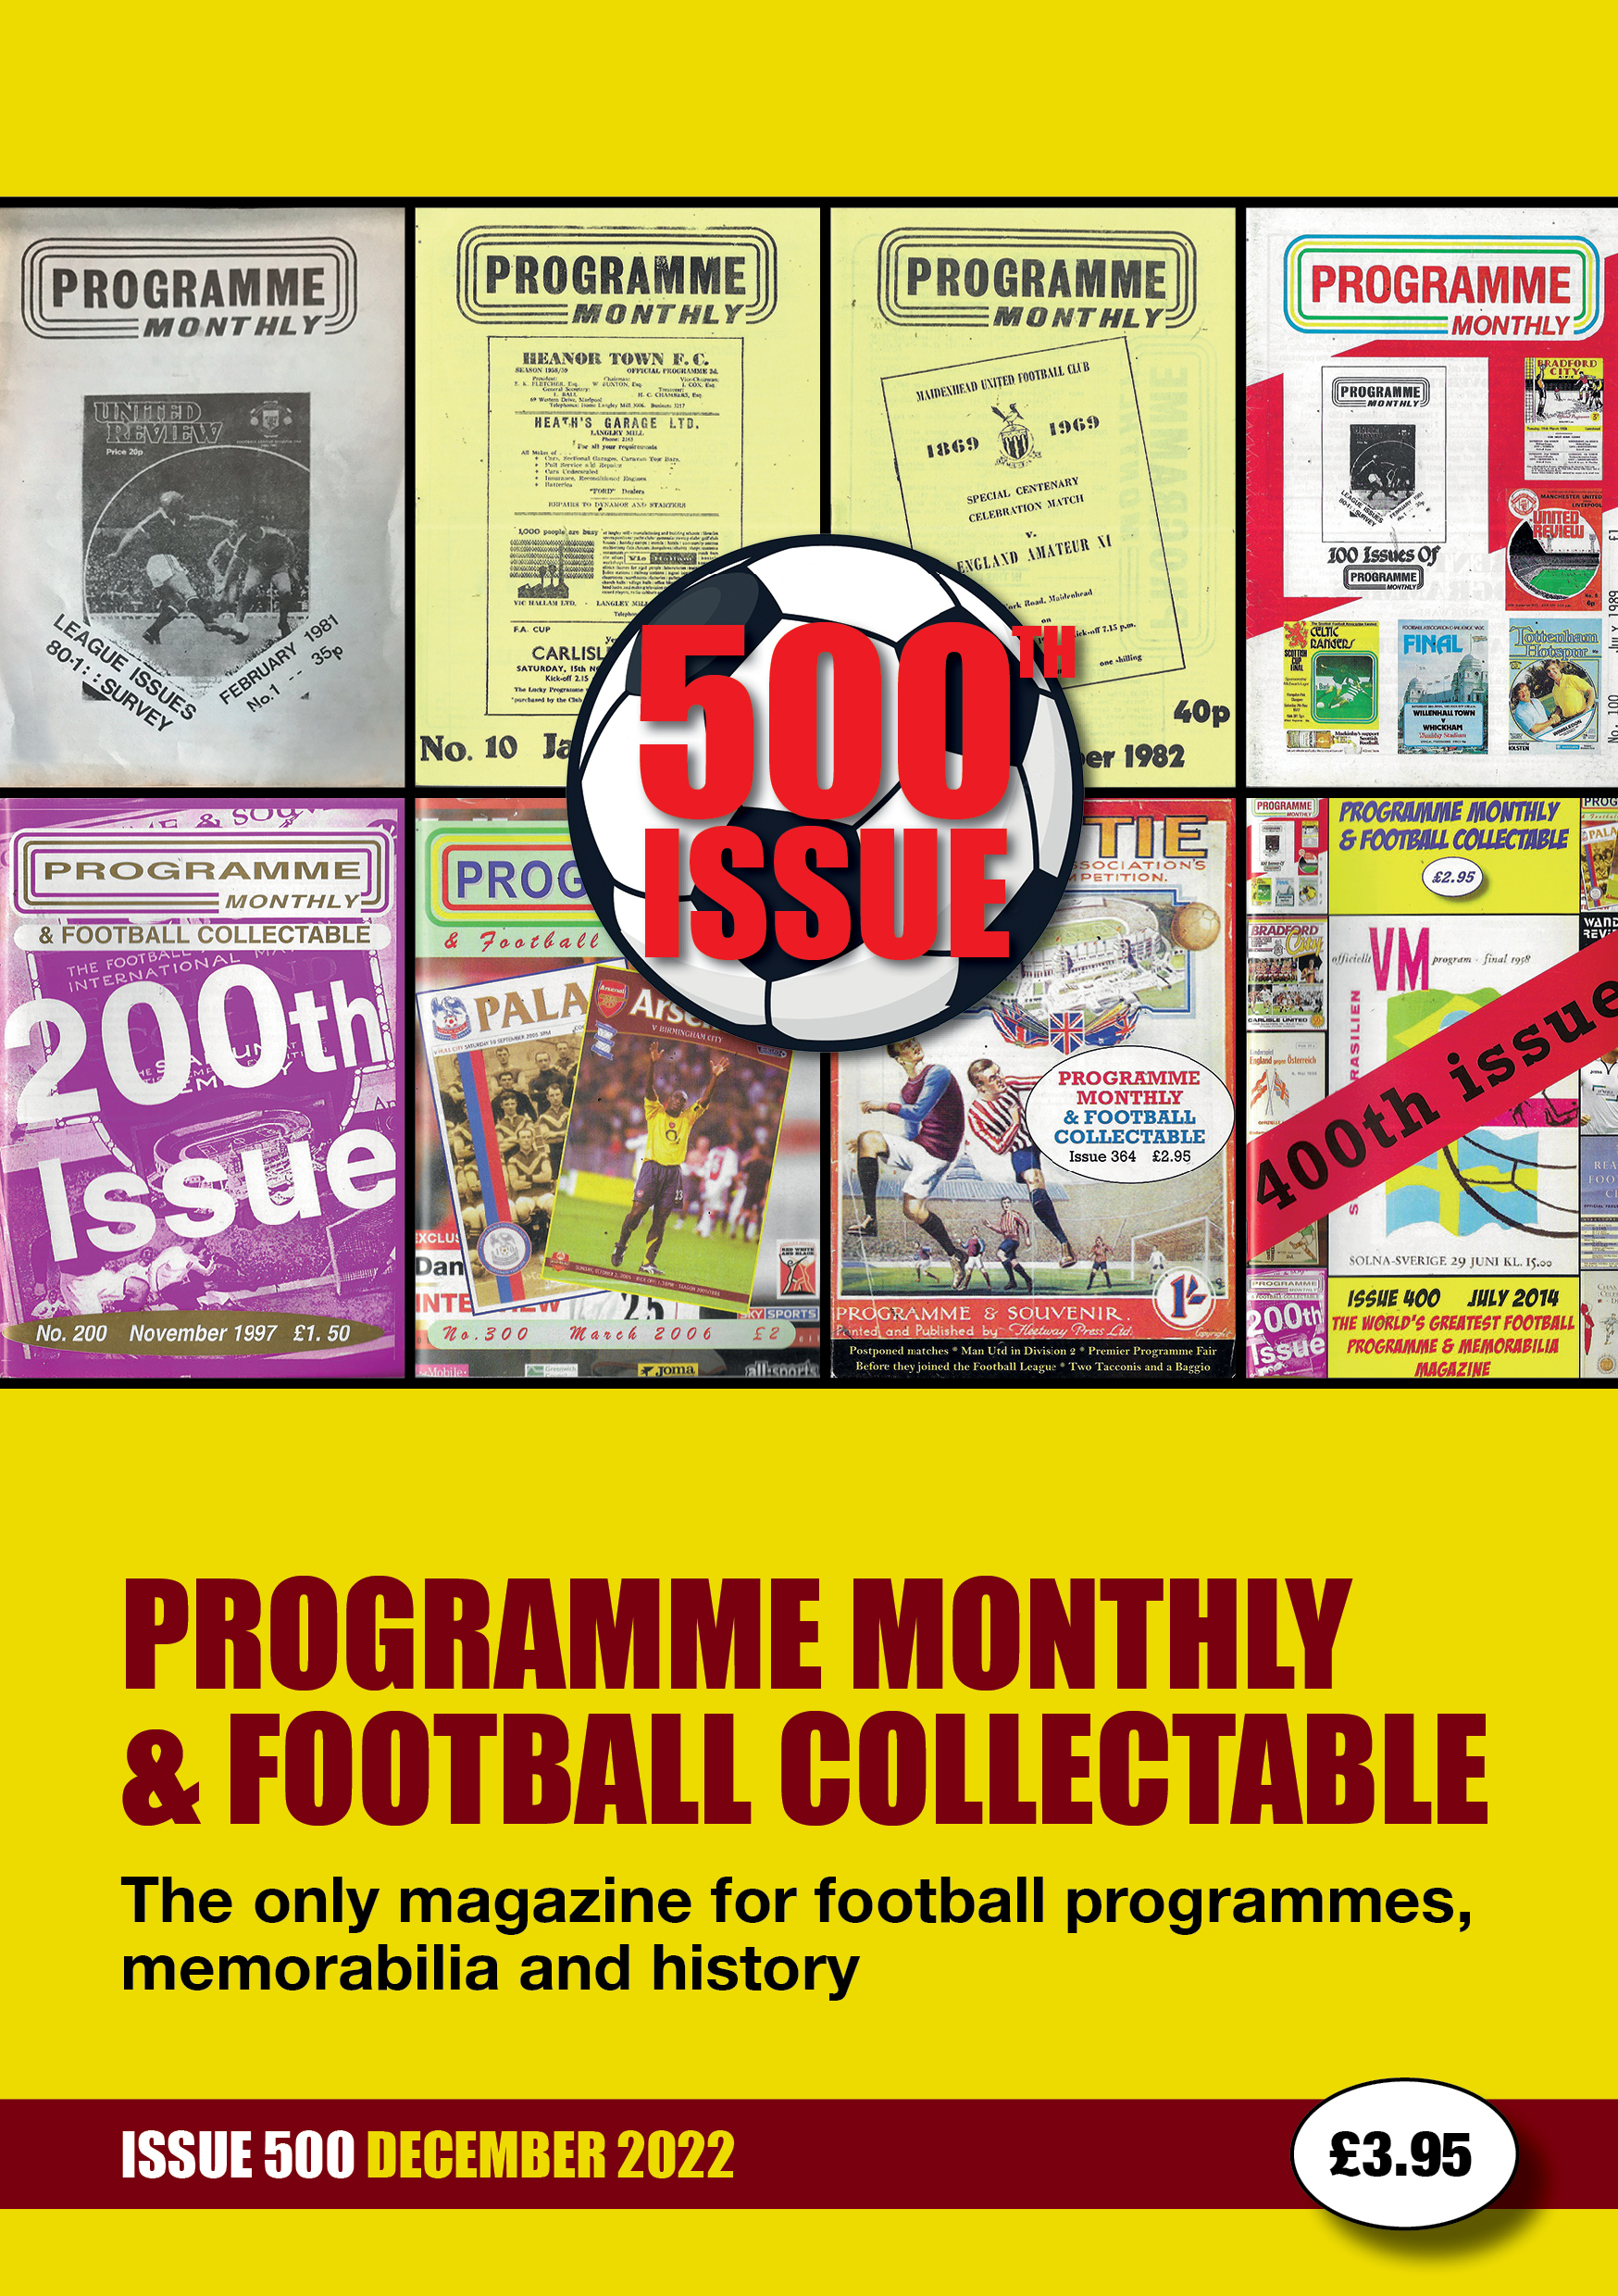 Programme Monthly - Issue 500 December 2022